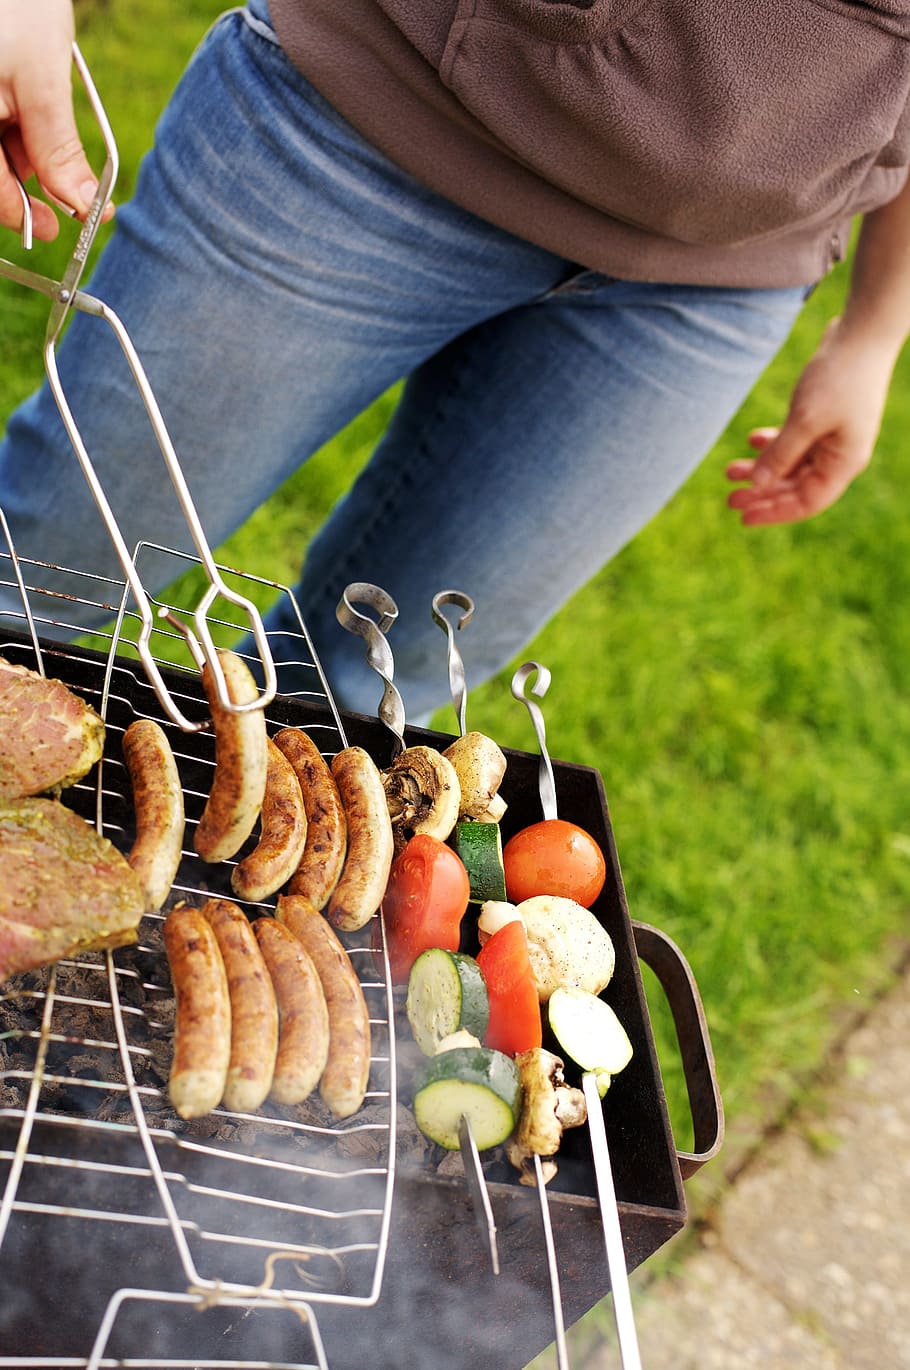 person, making, barbecue sausage, barbecue, grill, spies, sausage, charcoal, food, garden